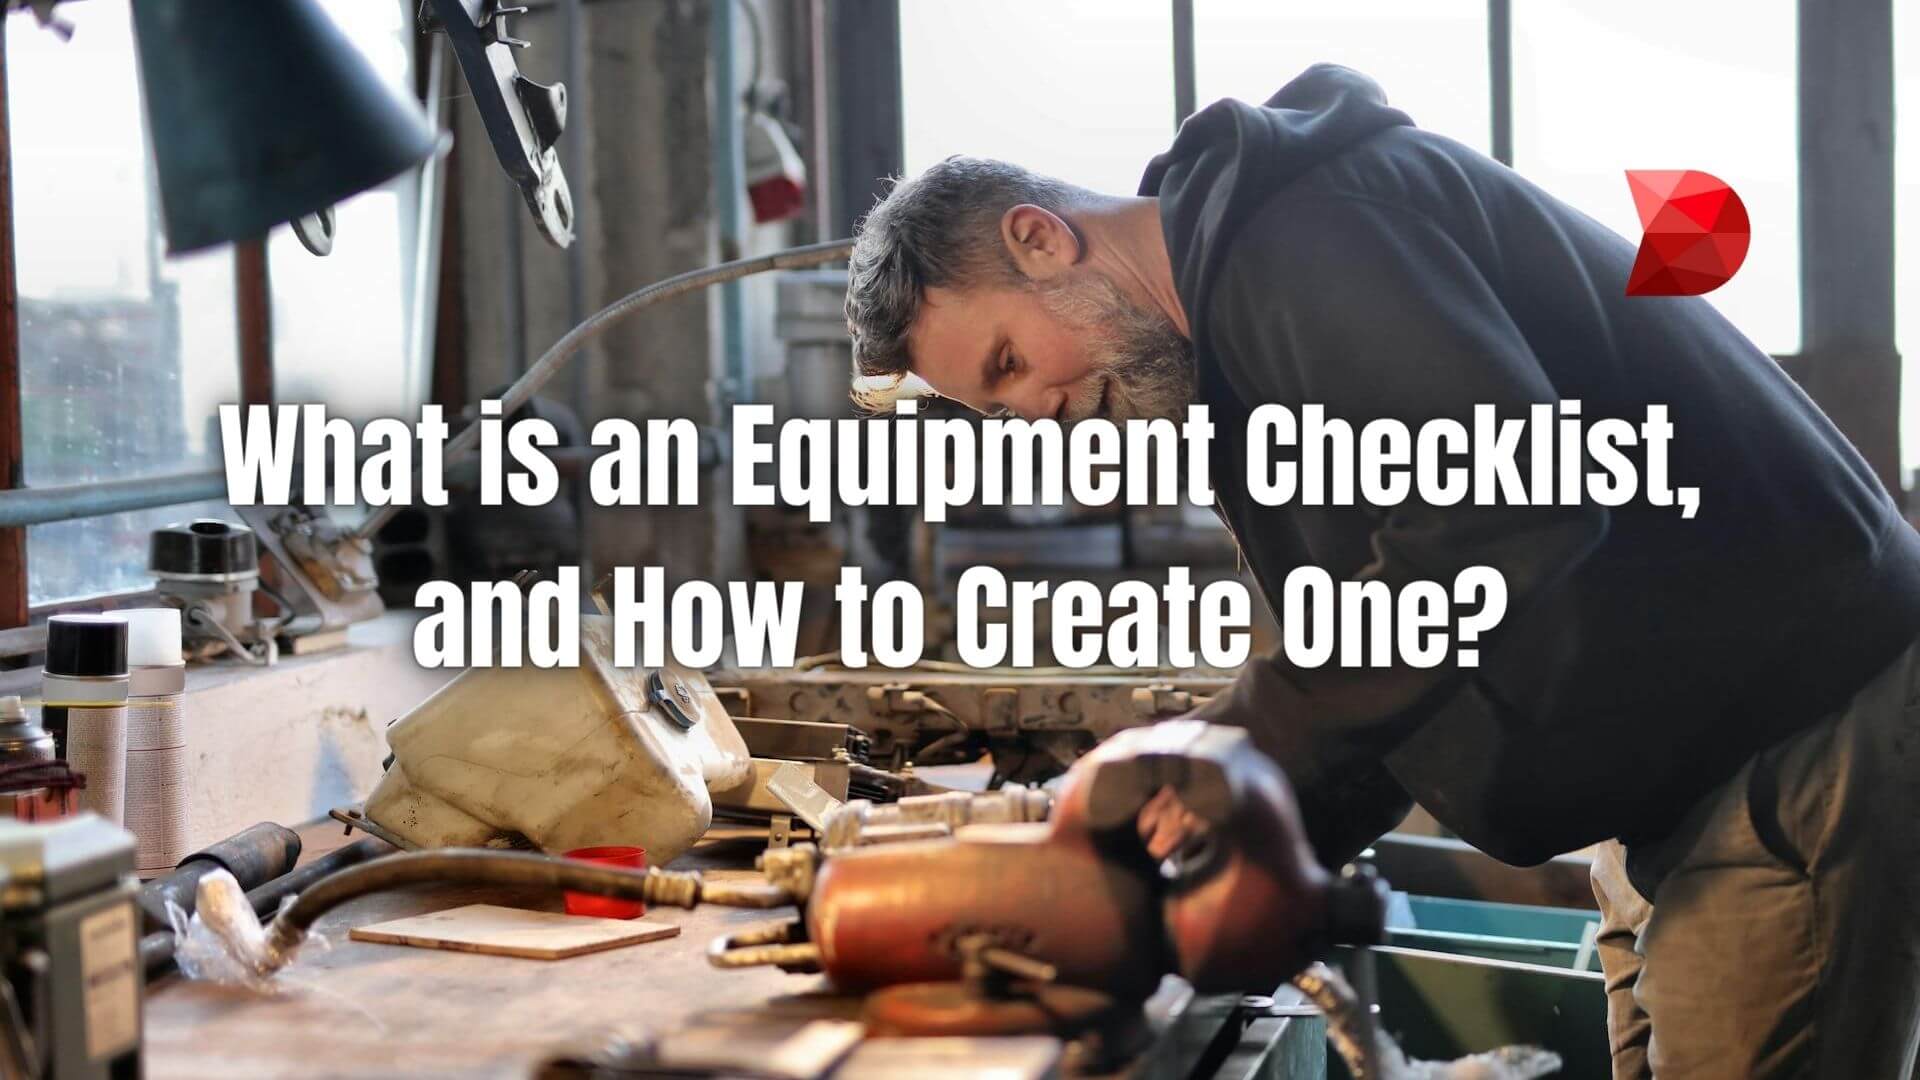 Discover expert tips on crafting the perfect equipment checklist. Learn what to include and how to organize your essential items efficiently.